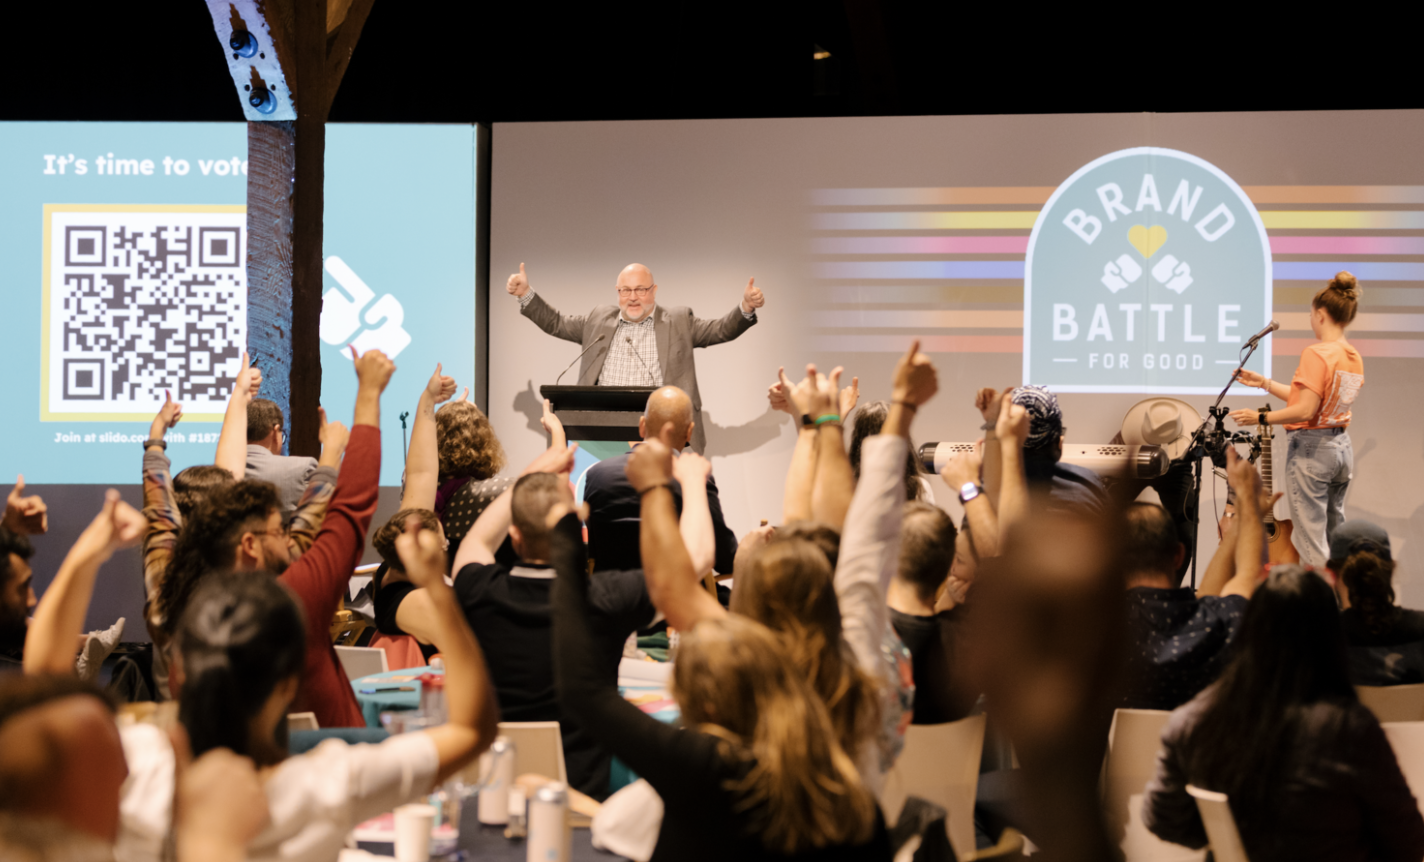 Brand Battle for Good event recap: Tackling Social Isolation in Vancouver